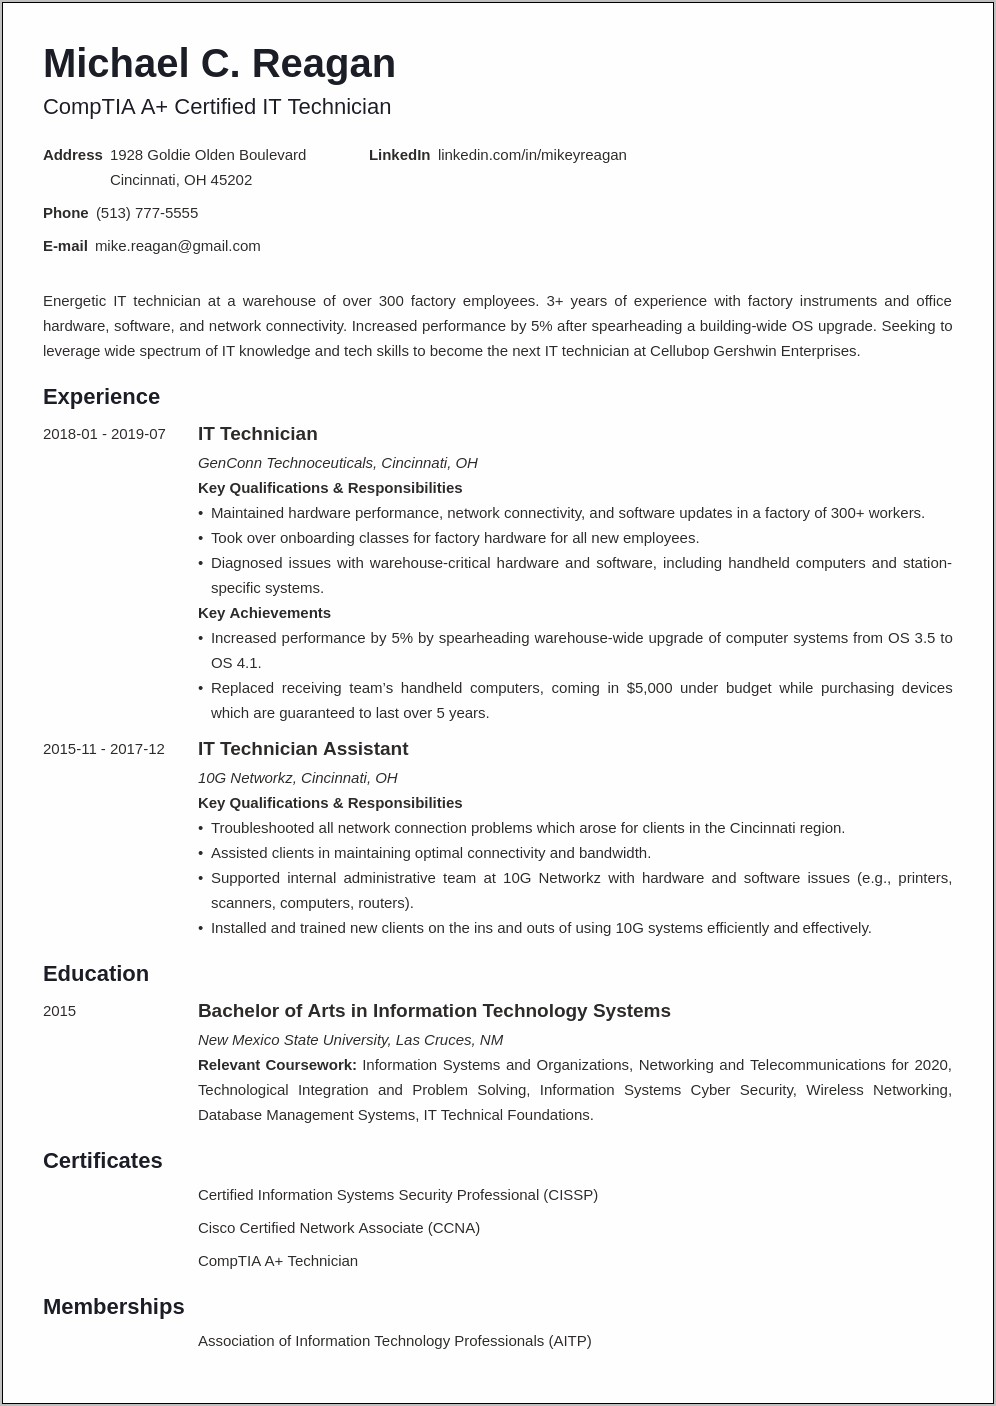 Resume Objective Examples For Technicians